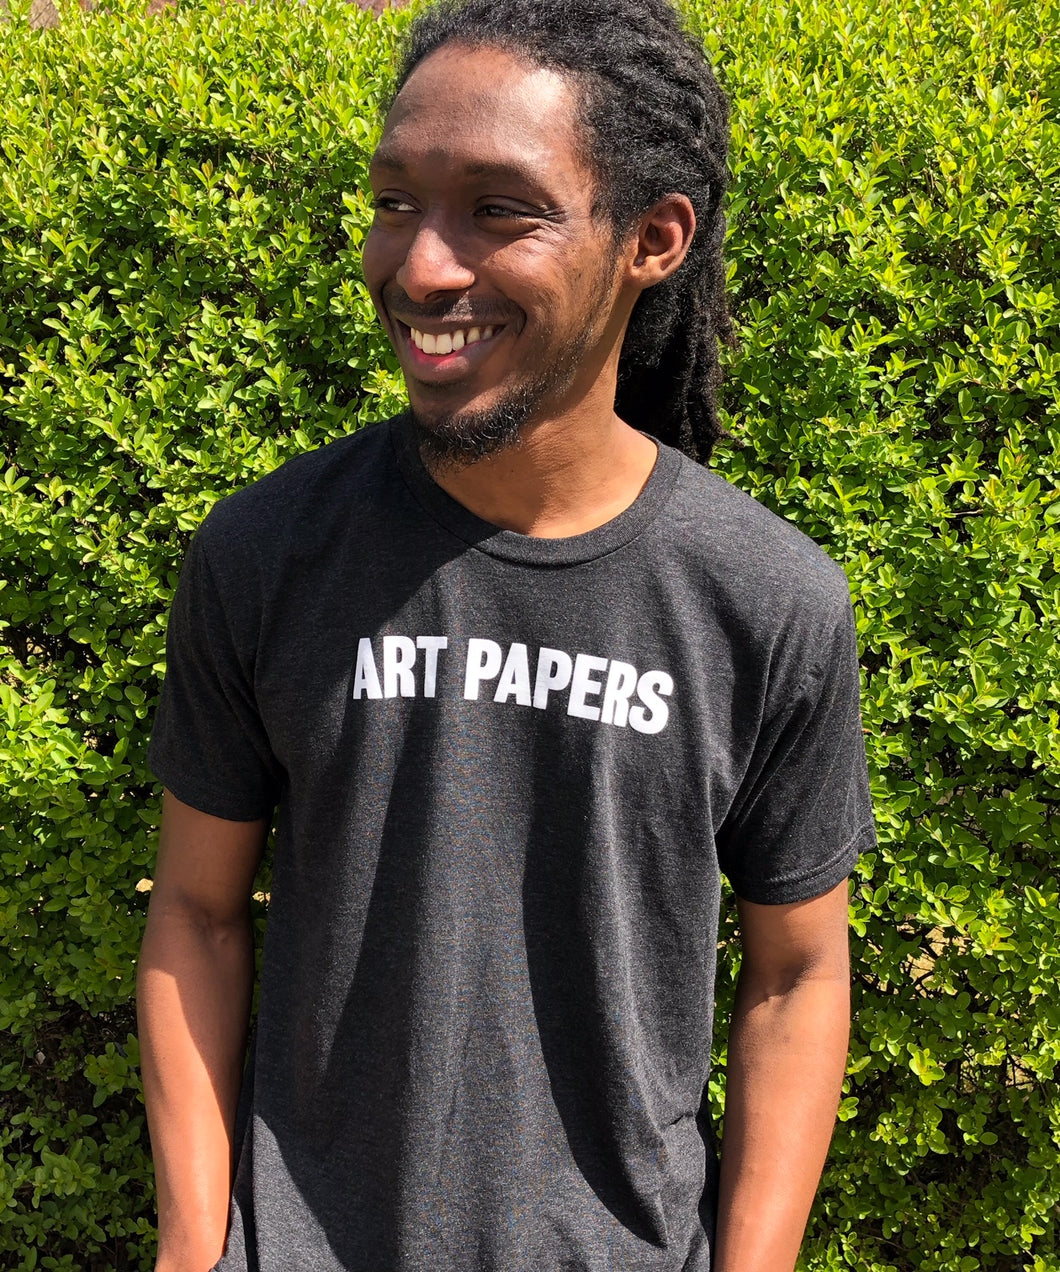 ART PAPERS T-Shirt - GRAY